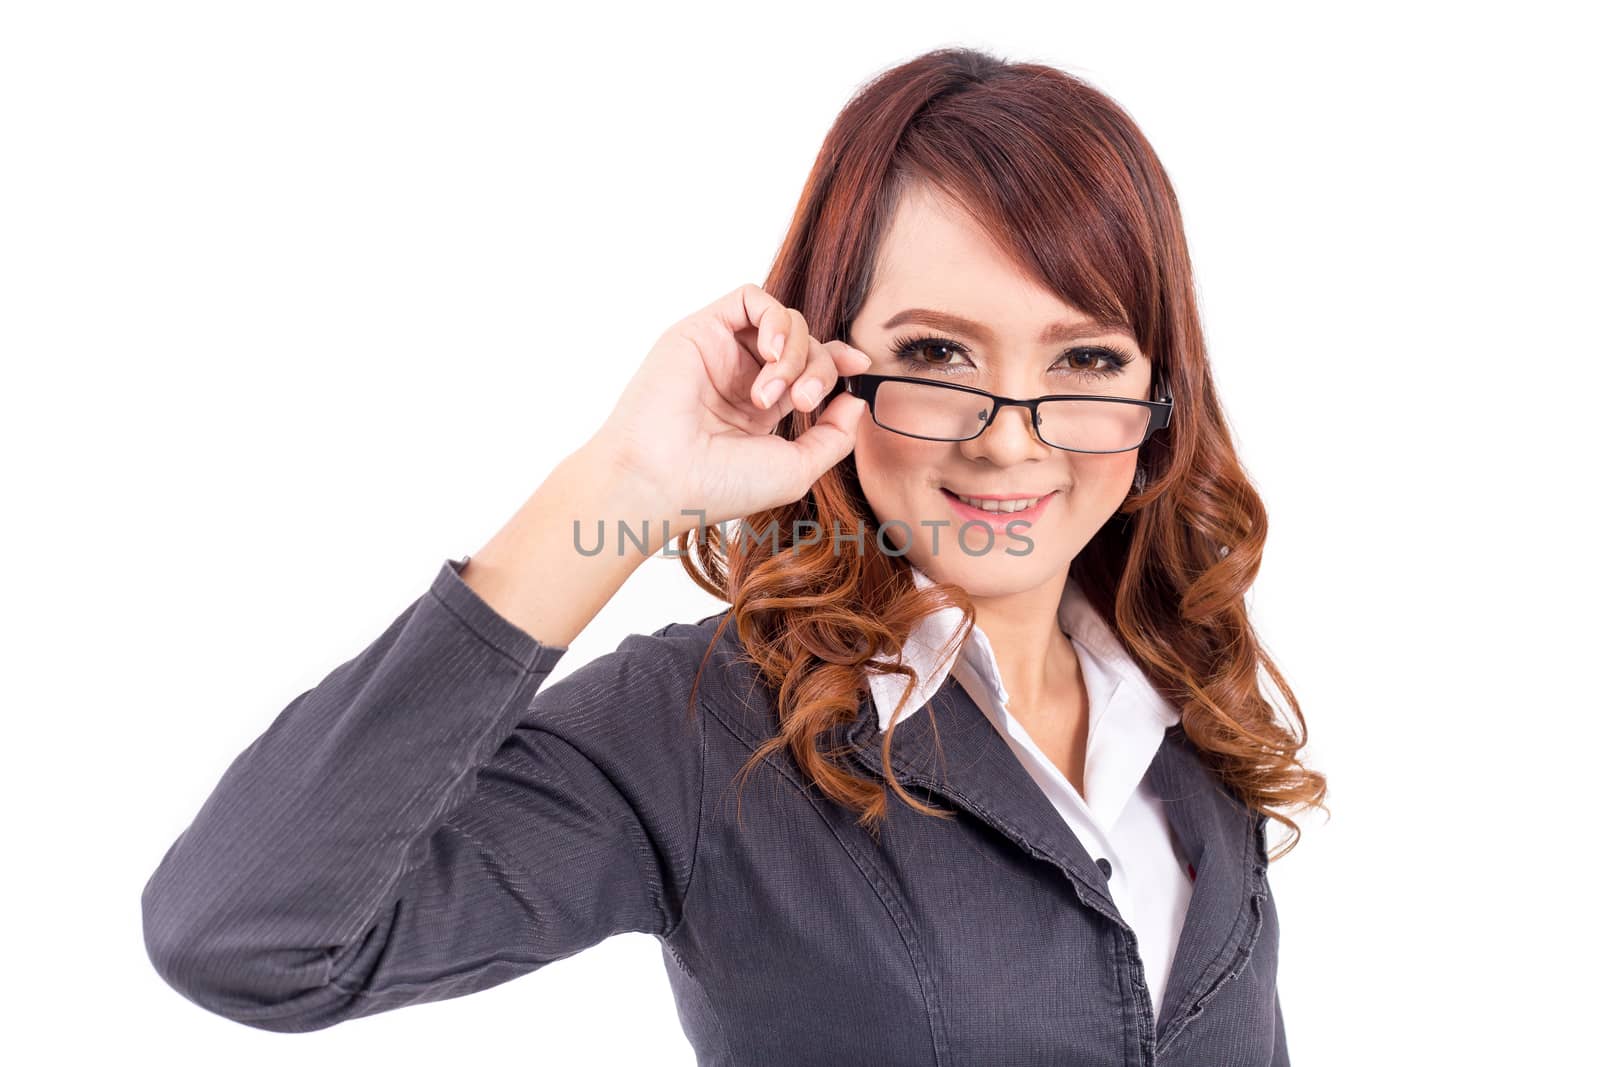 Smiling young business woman wearing glasses